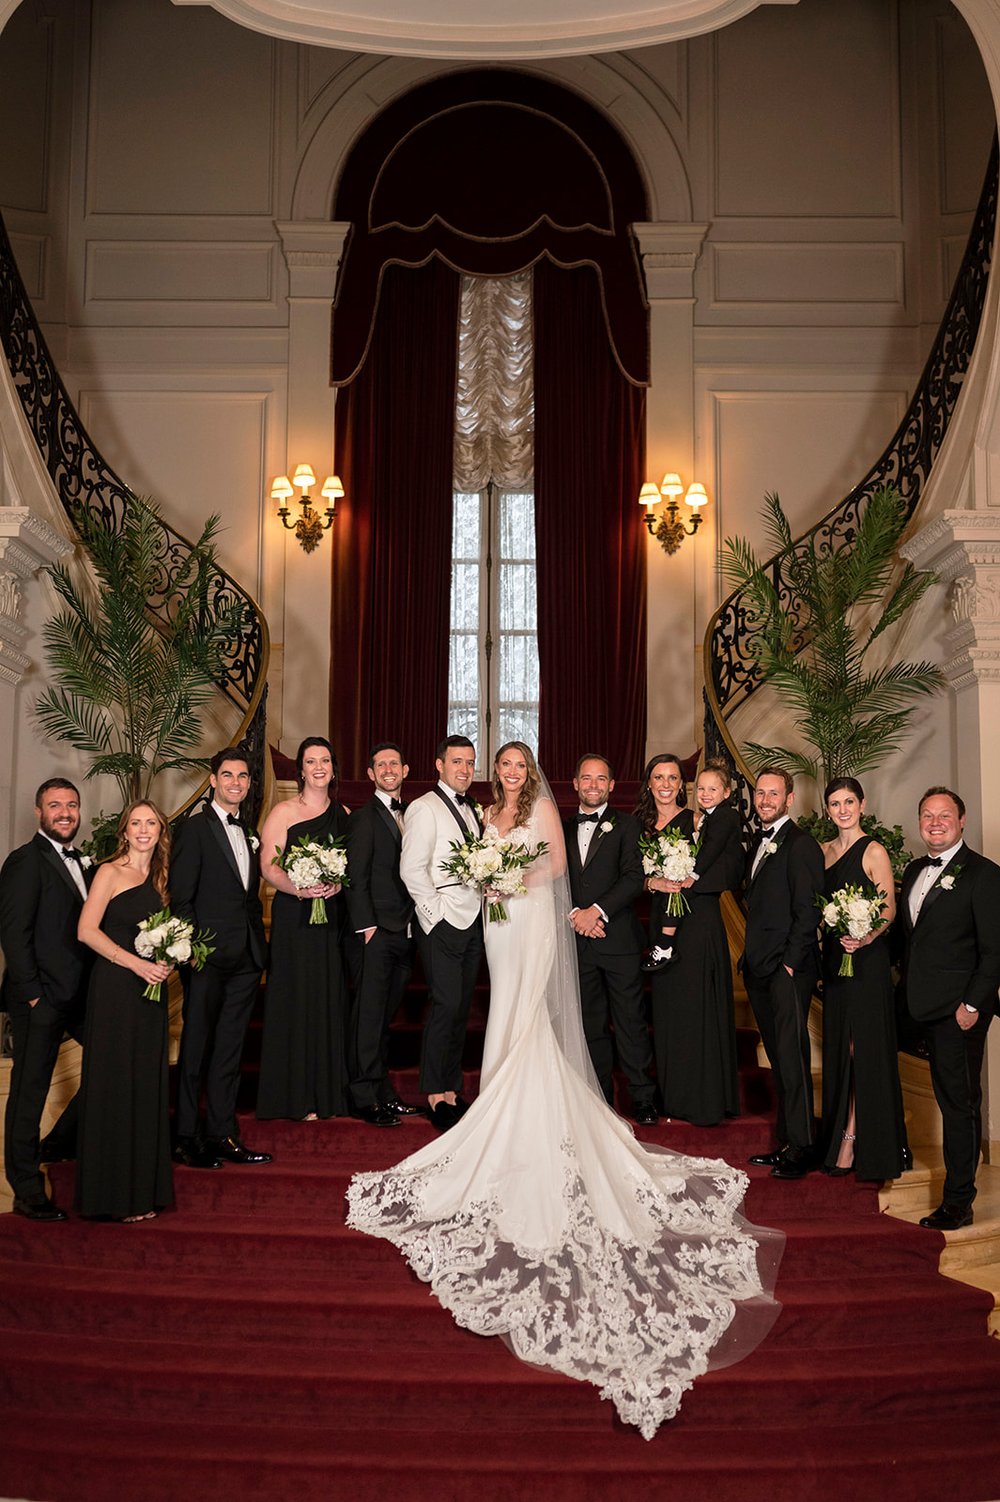  bridal party photos with bride and groom inside rosecliff mansion 